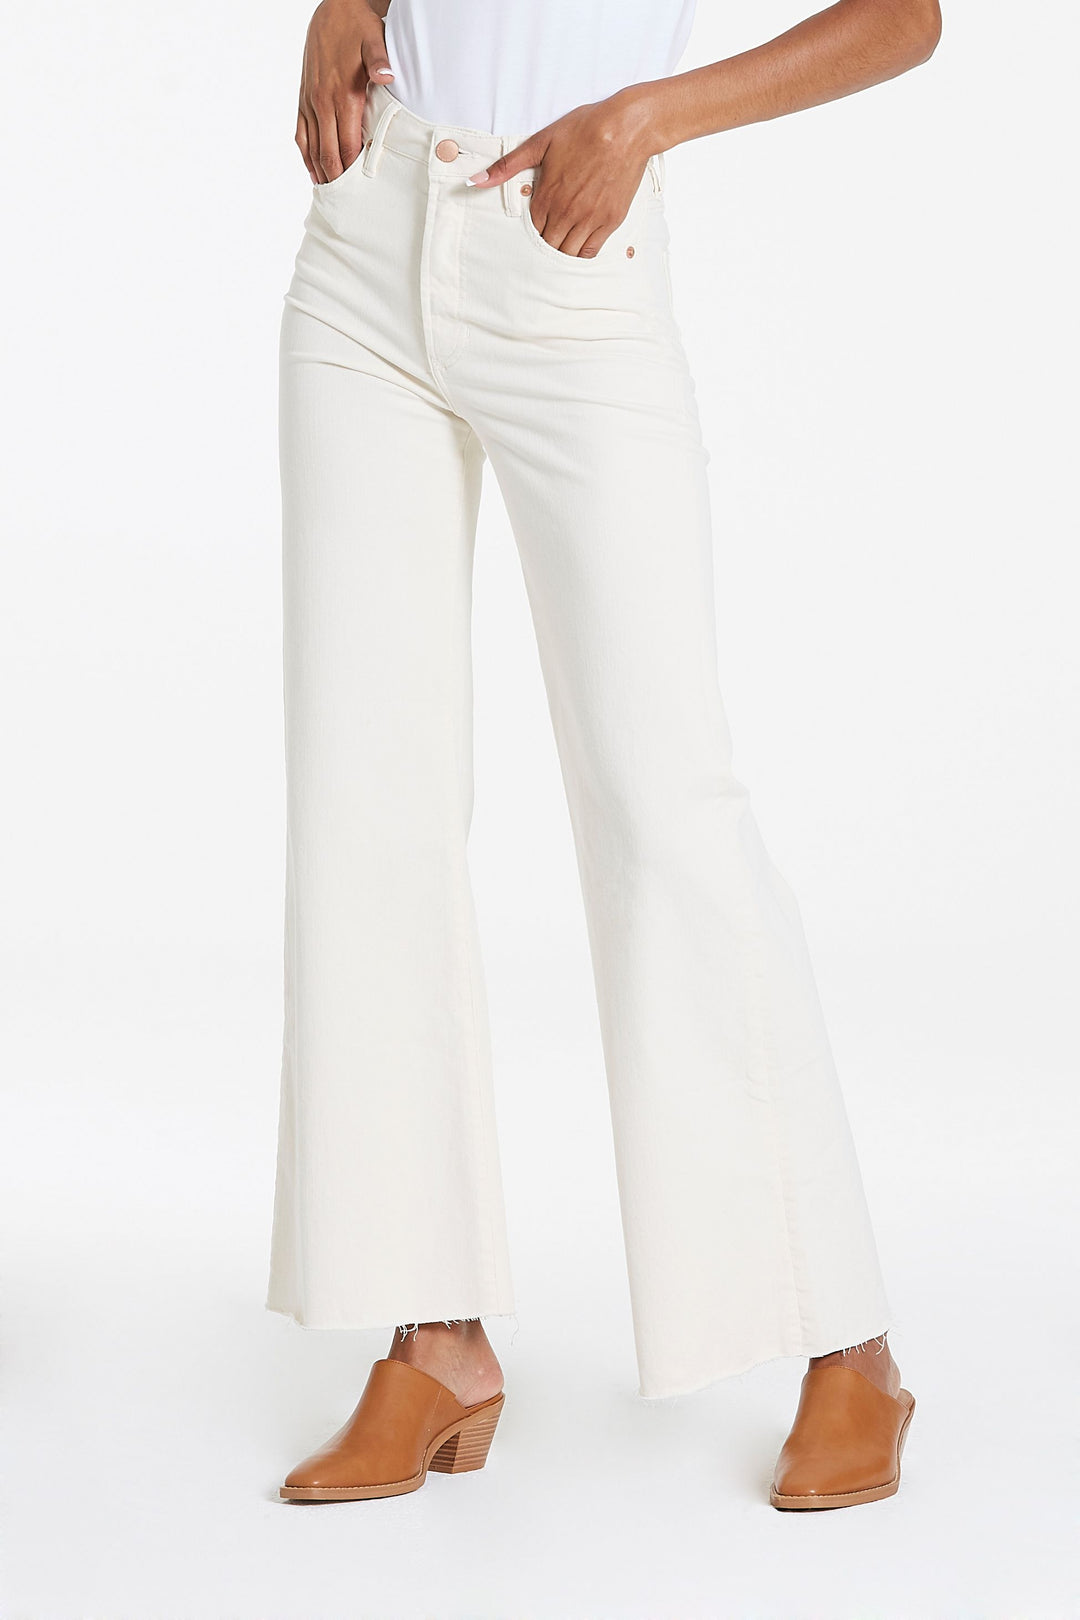 FIONA SKINNY WIDE LEG PANT-WHEAT - Kingfisher Road - Online Boutique